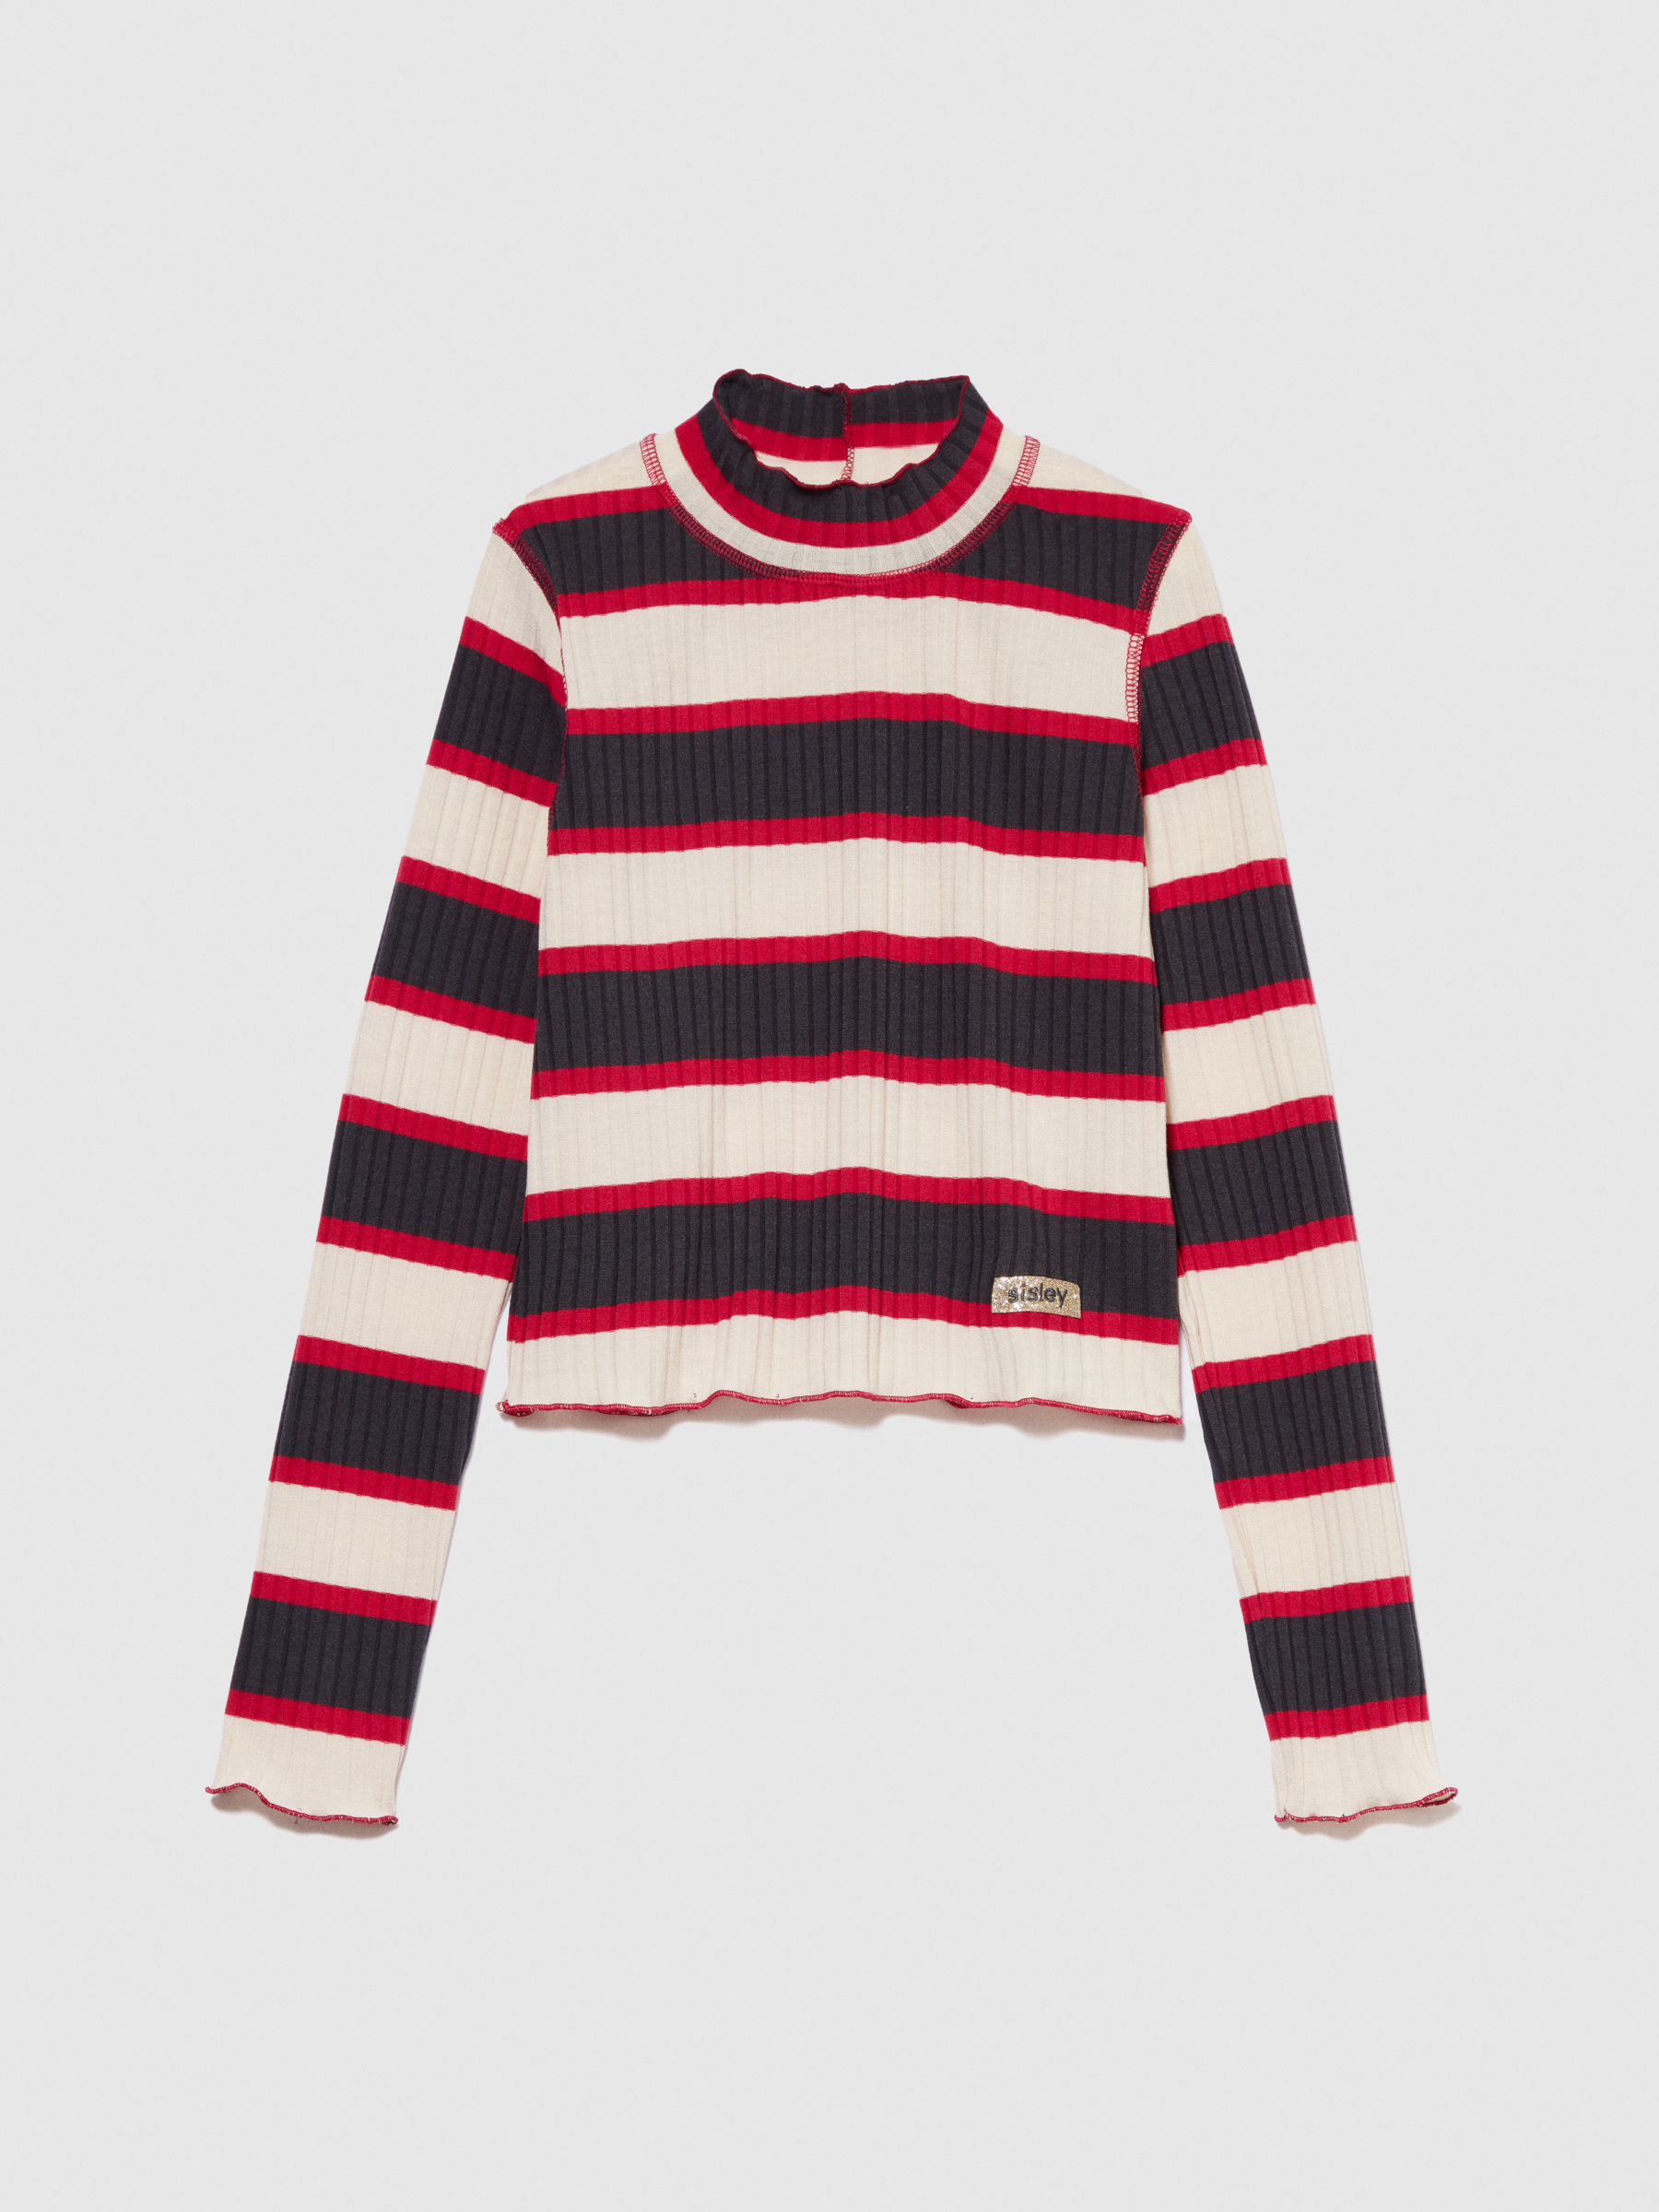 Sisley Young - Striped Turtleneck T-shirt, Woman, Multi-color, Size: M